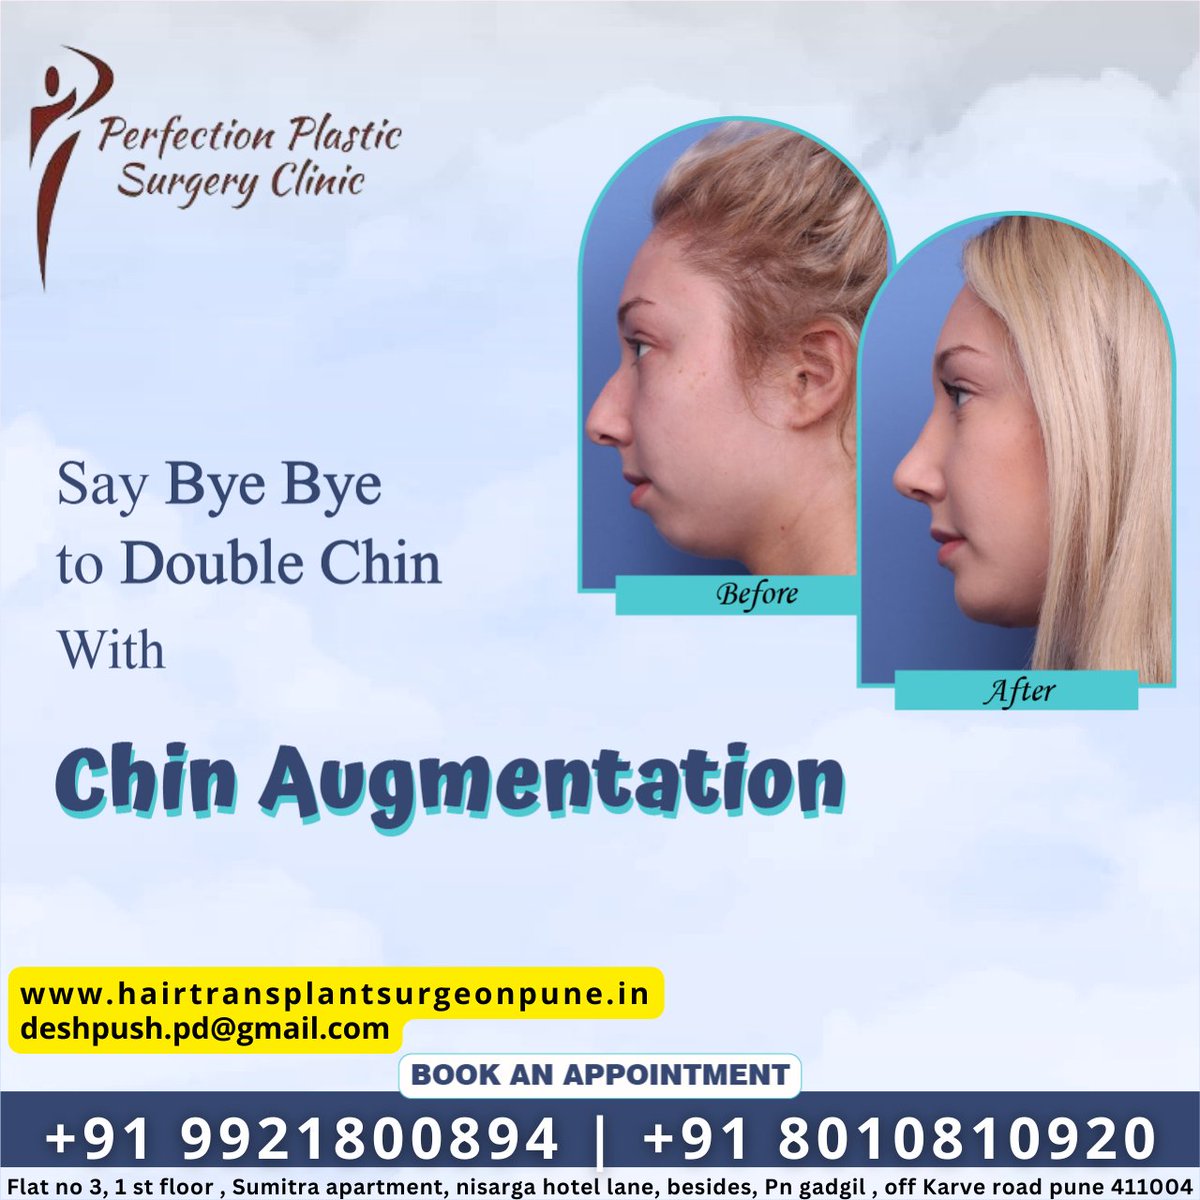 Say bye Bye to double chin with chin augmentation
Make your Smile More Attractive
Book An Appointment

Call : - +91 9921800894

Call : - +91 8010910920

#perfectionplasticsurgeryclinic #face #skin #lips #chinaugmentation